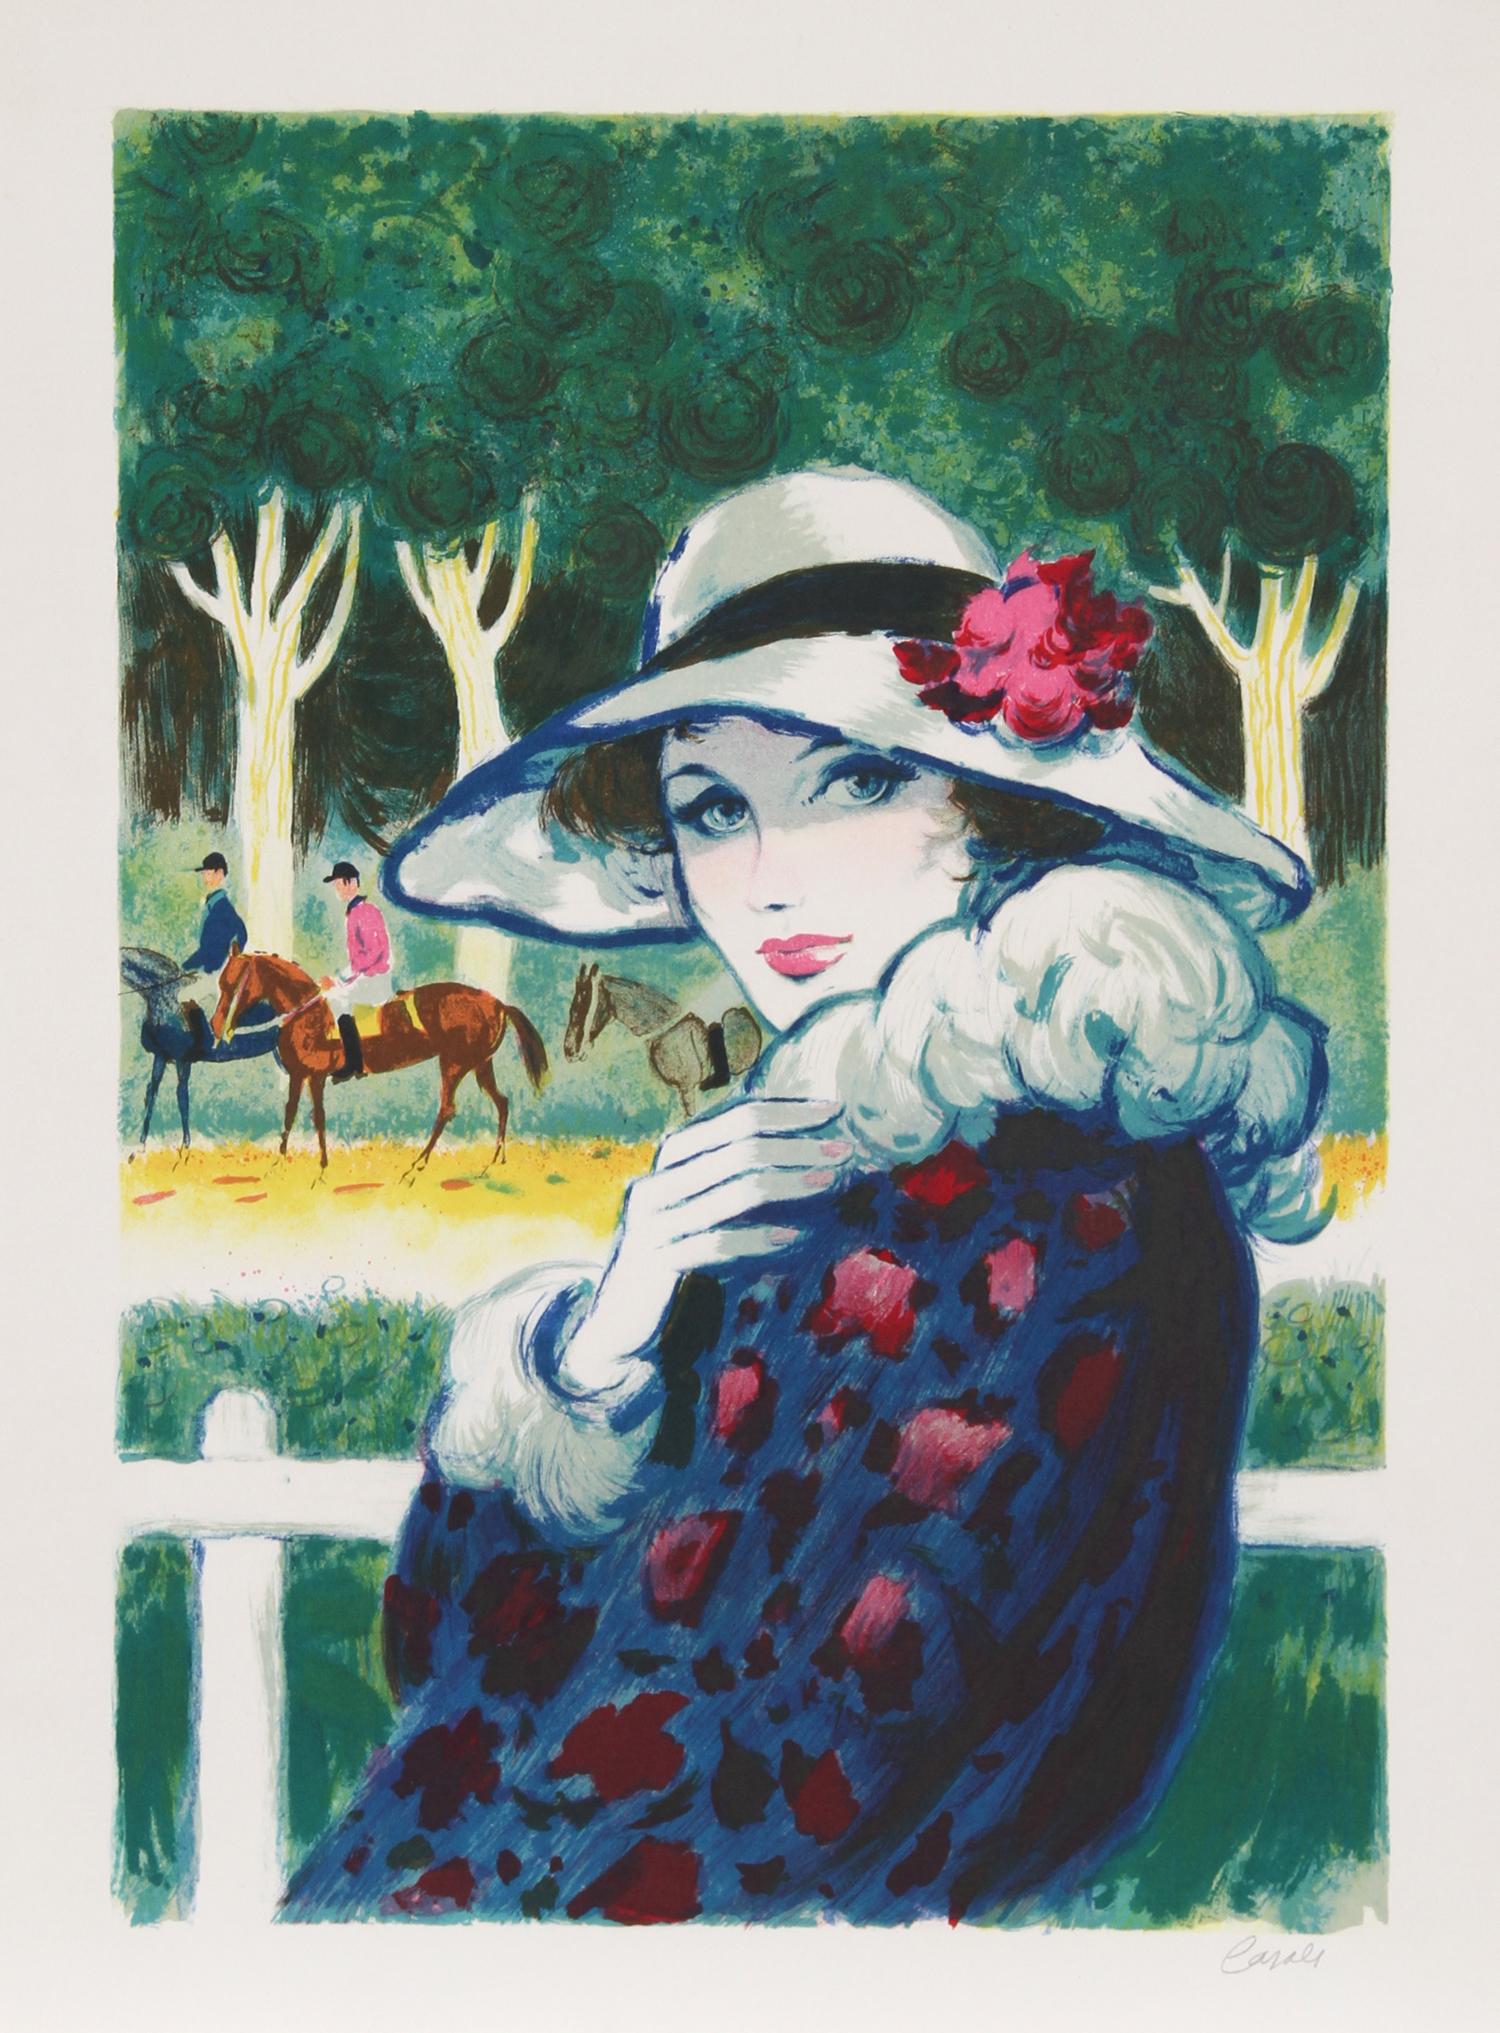 Lady at the Races, Lithograph by Casals Pons 